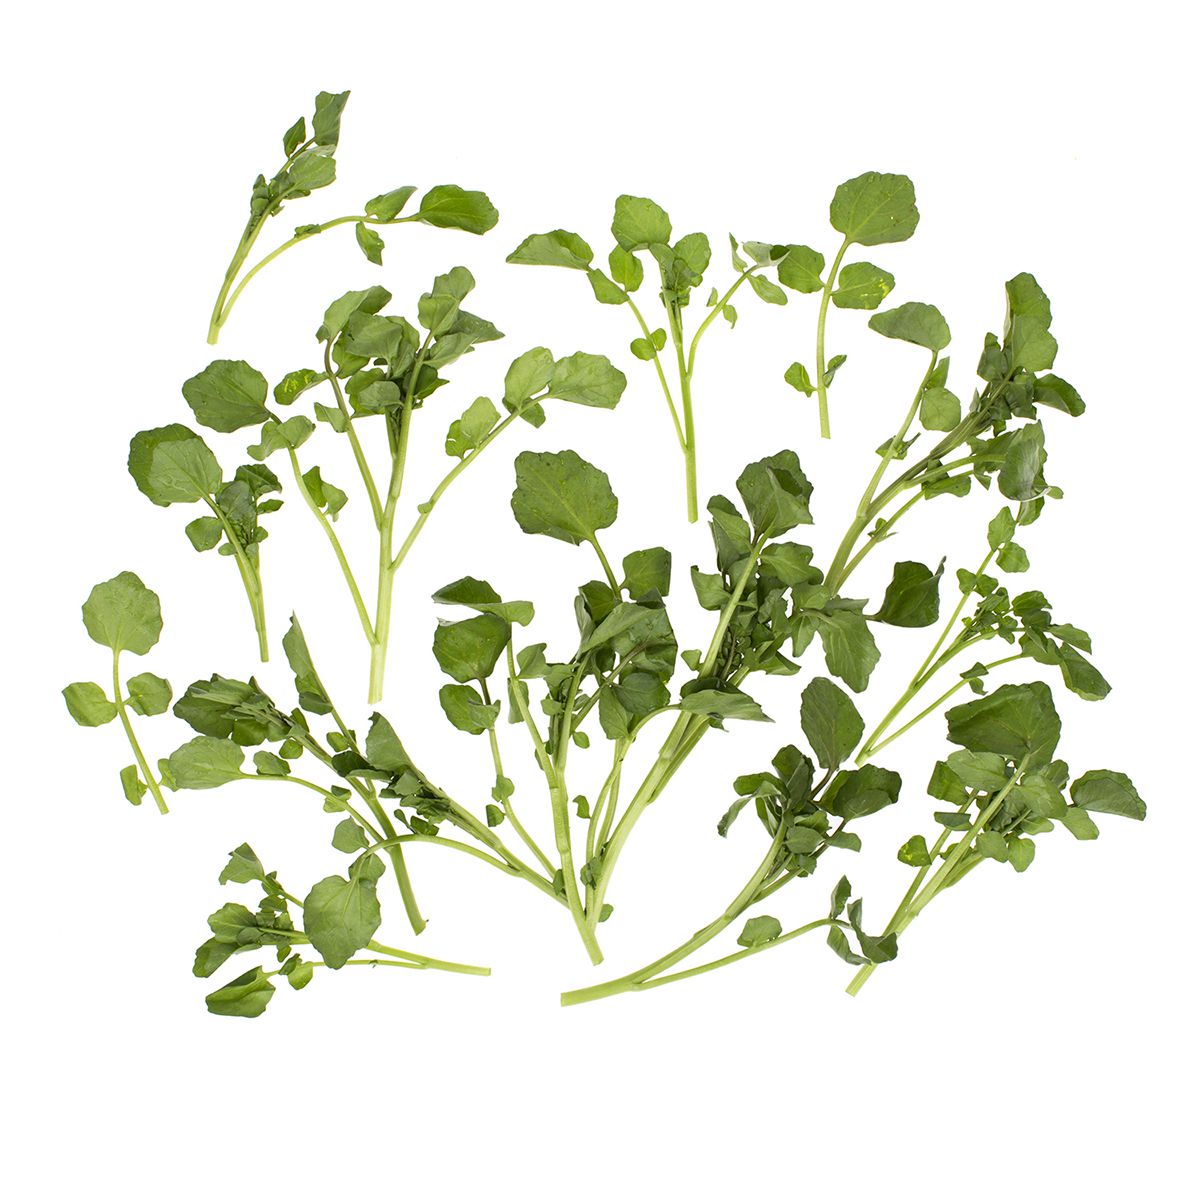 B&W Bunched Watercress 24 ct